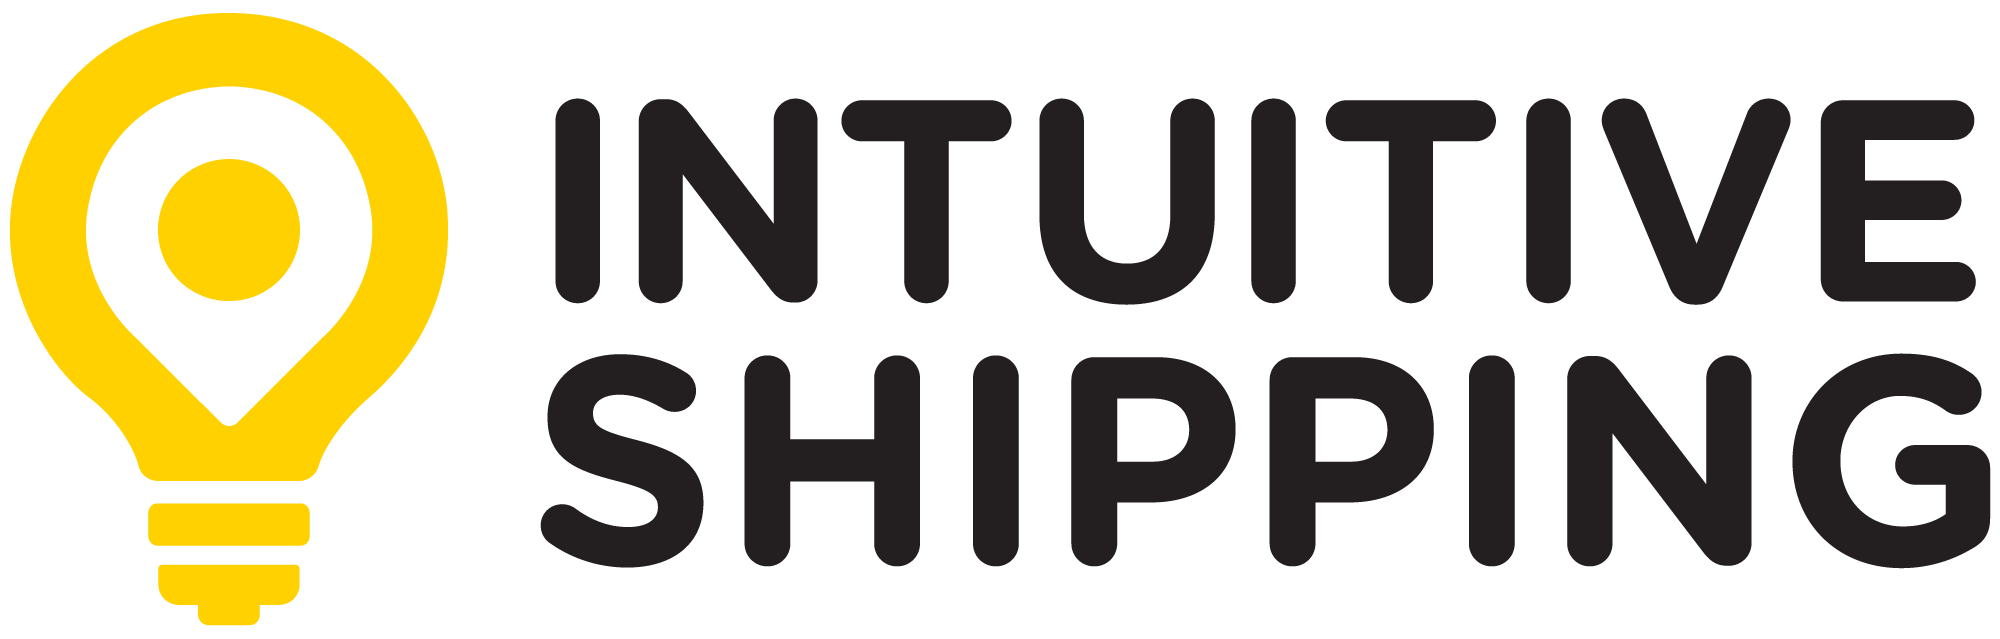 Intuitive Shipping Help Center